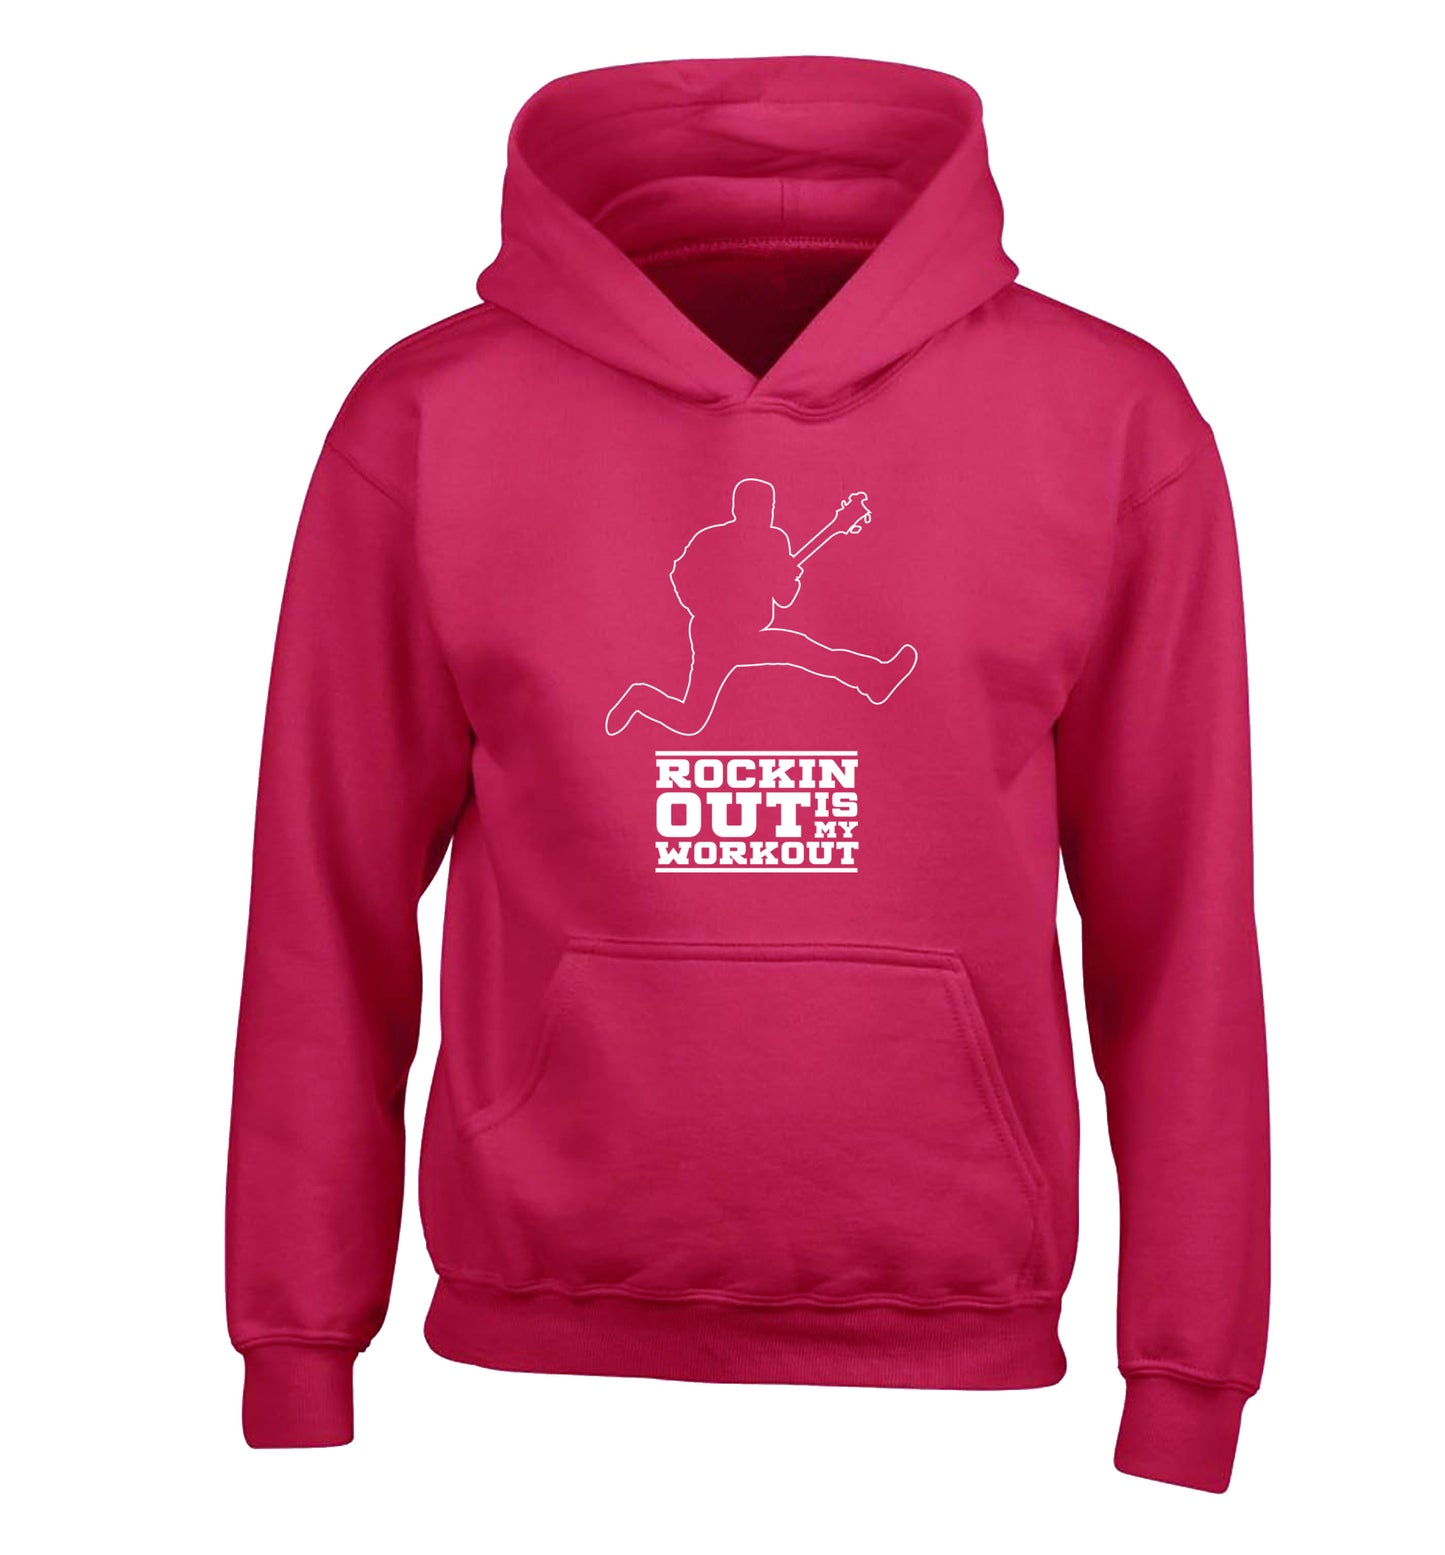 Rockin out is my workout 2 children's pink hoodie 12-13 Years